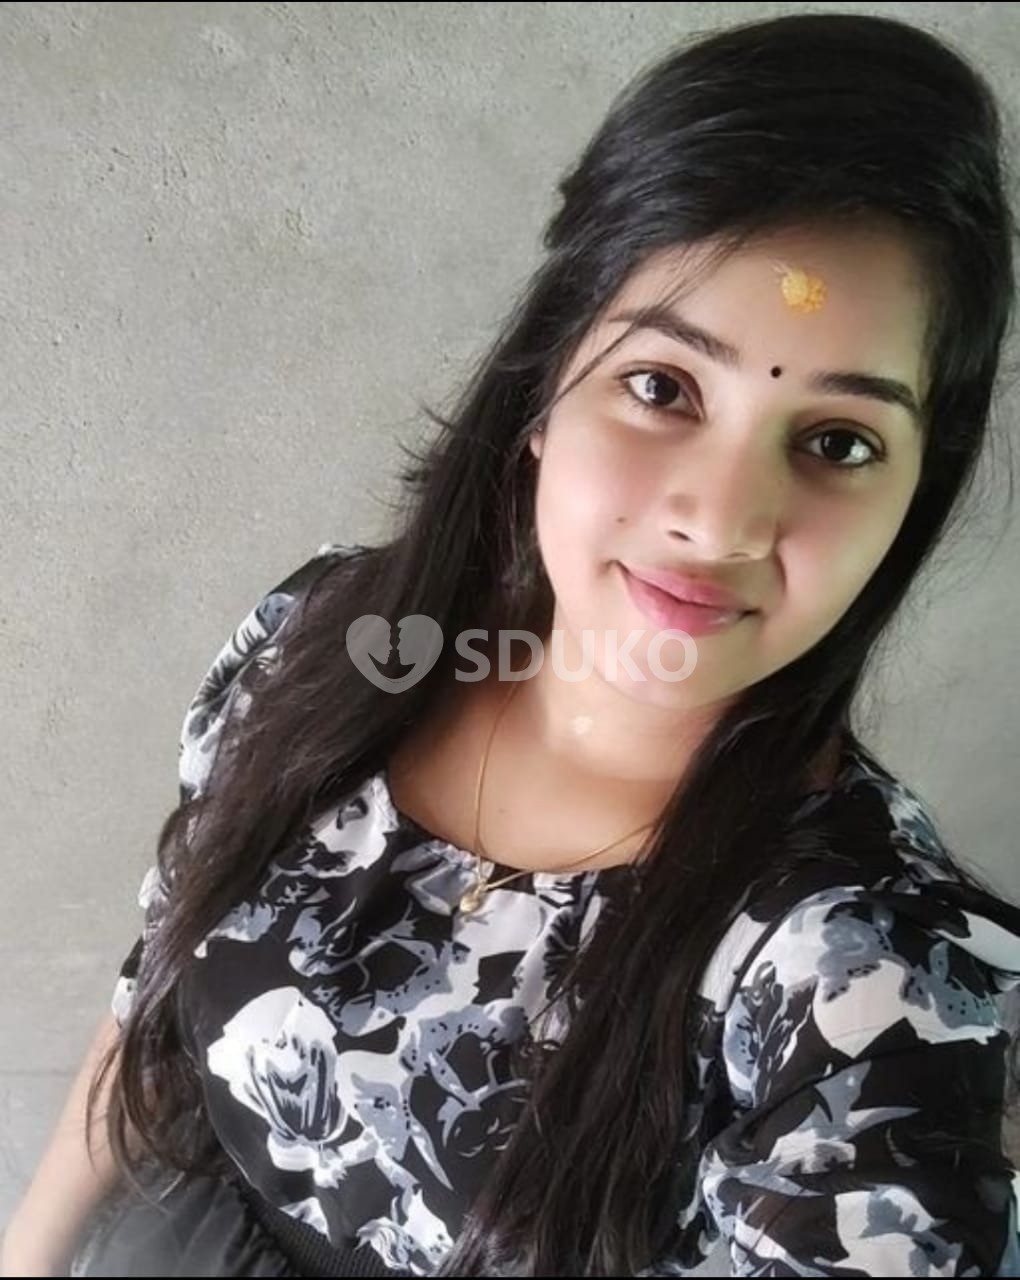 INDEPENDENT Ameerpet now MY SELF DIVYA SHARMA 1500 UNLIMITED SHOT ENJOYMENT HIGH PROFILE GIRLS AVAILABLE About me hello 